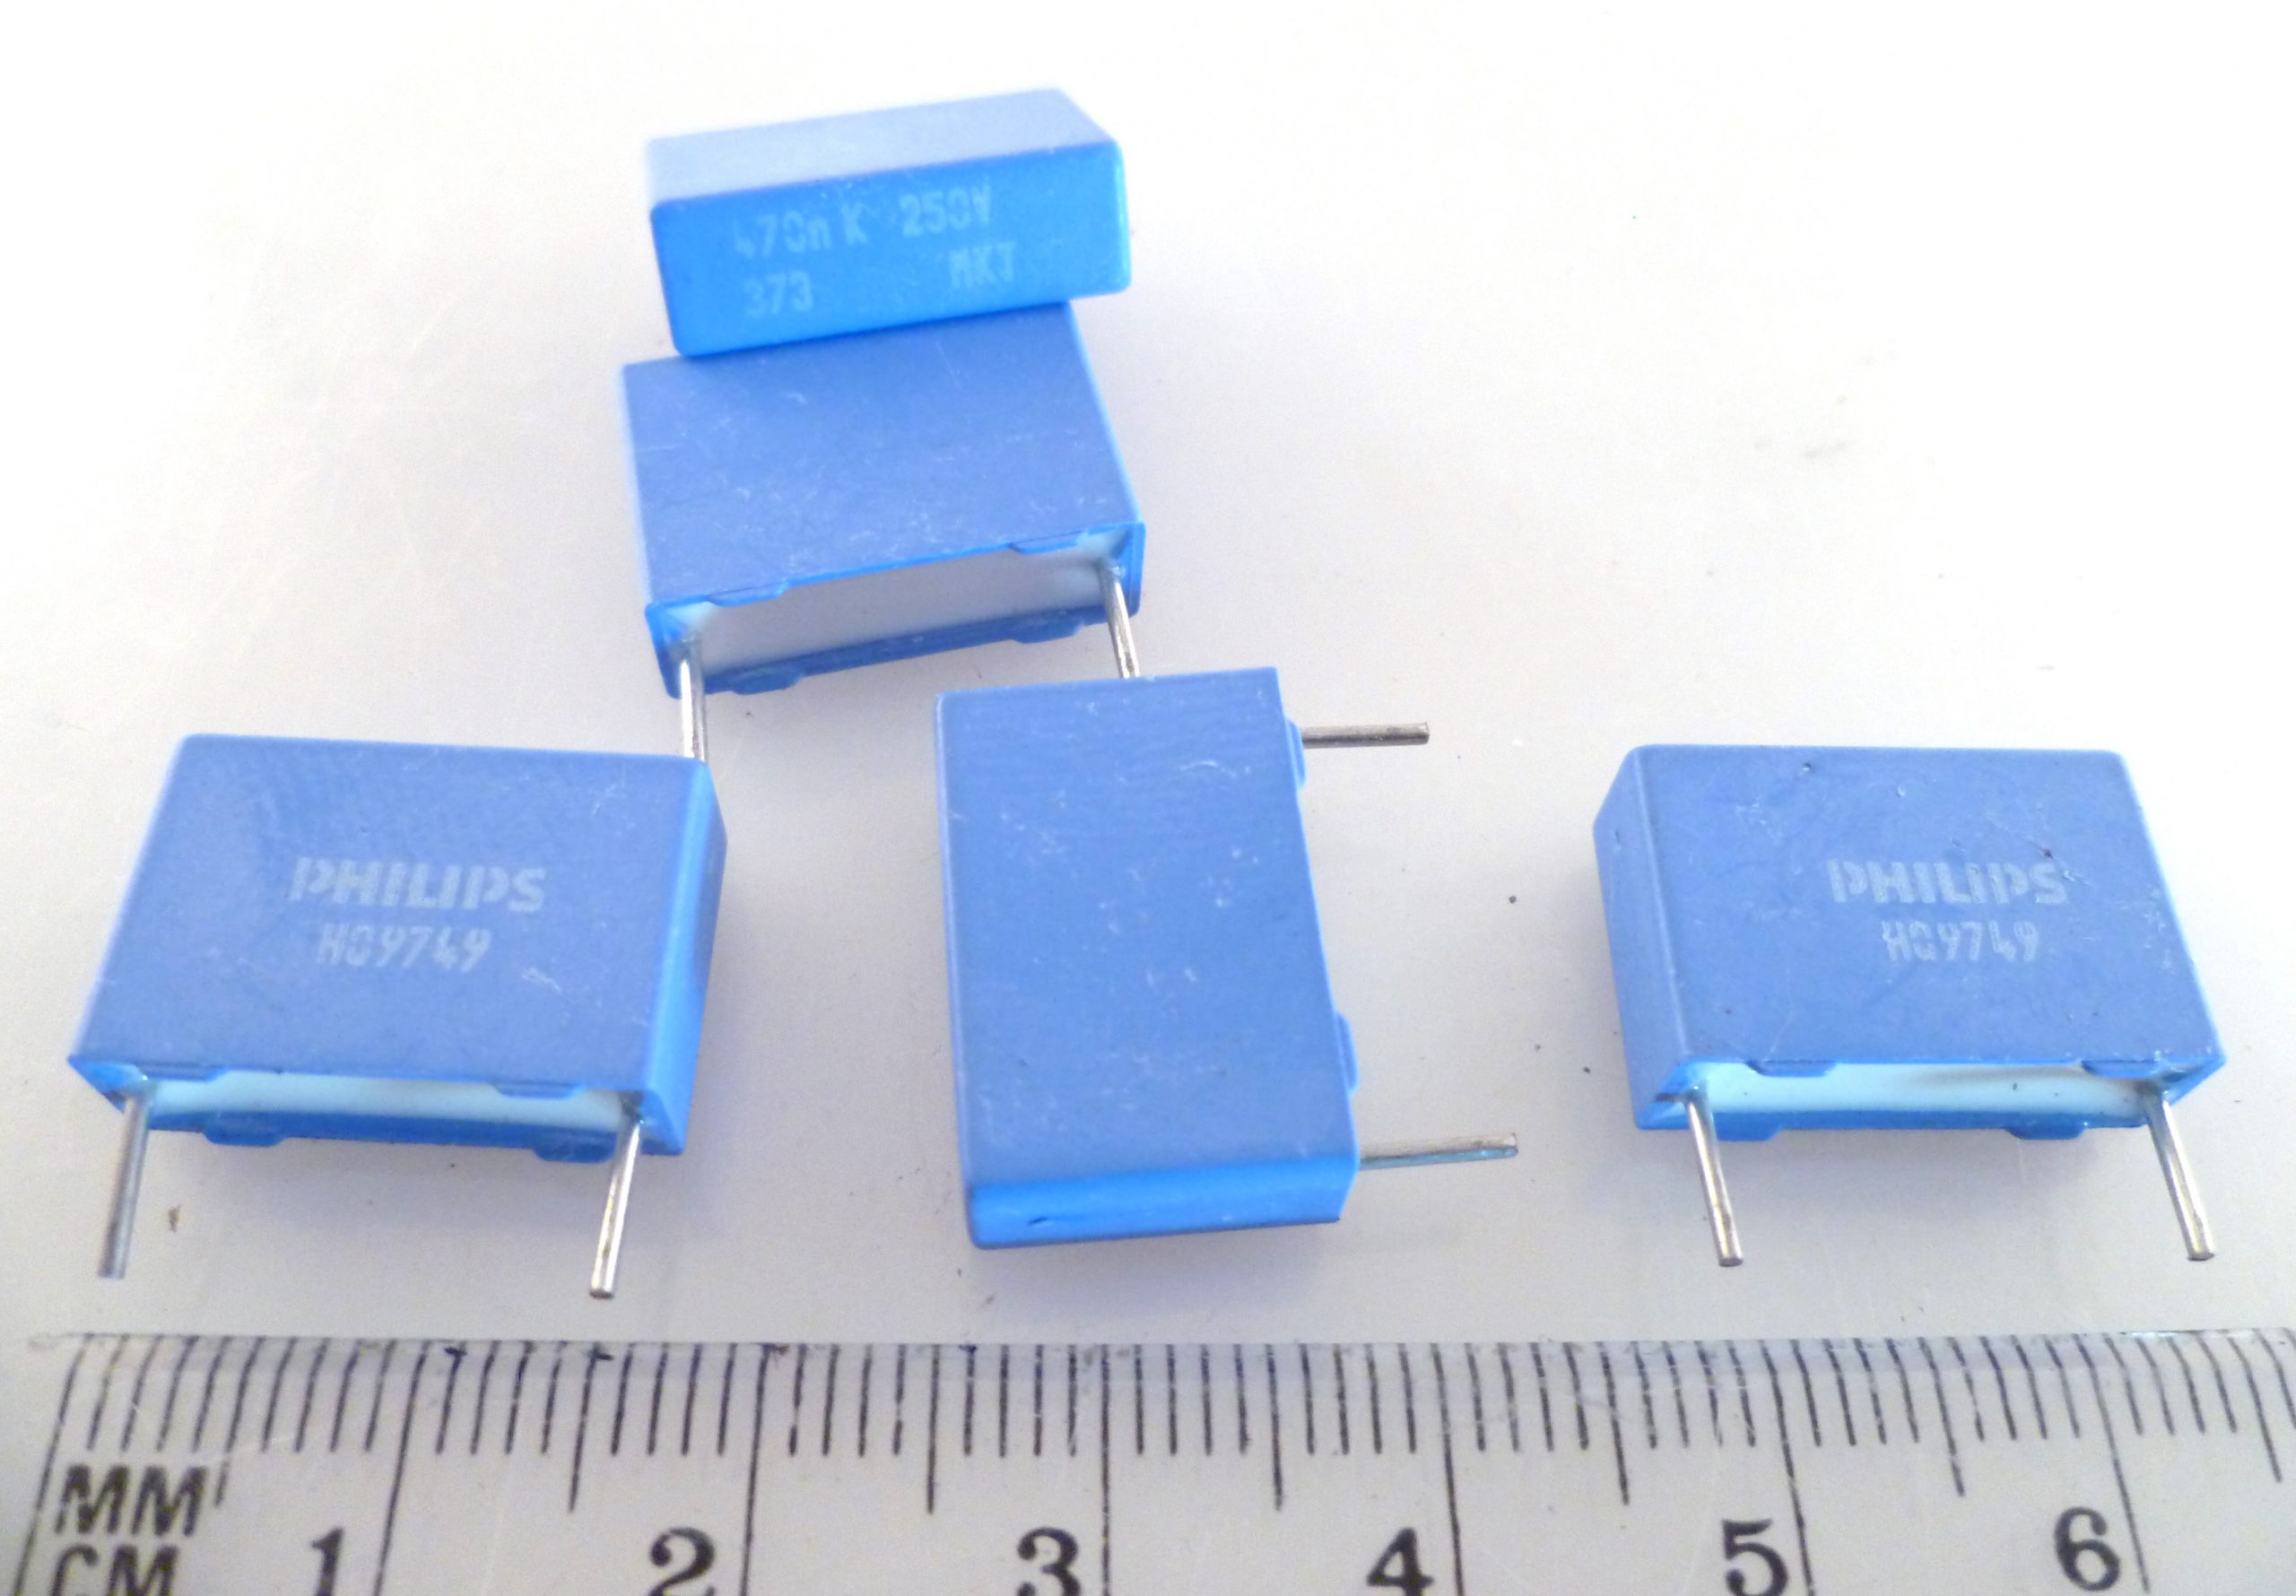 Philips MKT 373 Polyester Capacitor 470nF 10% 250V 5 Pieces MBD009J